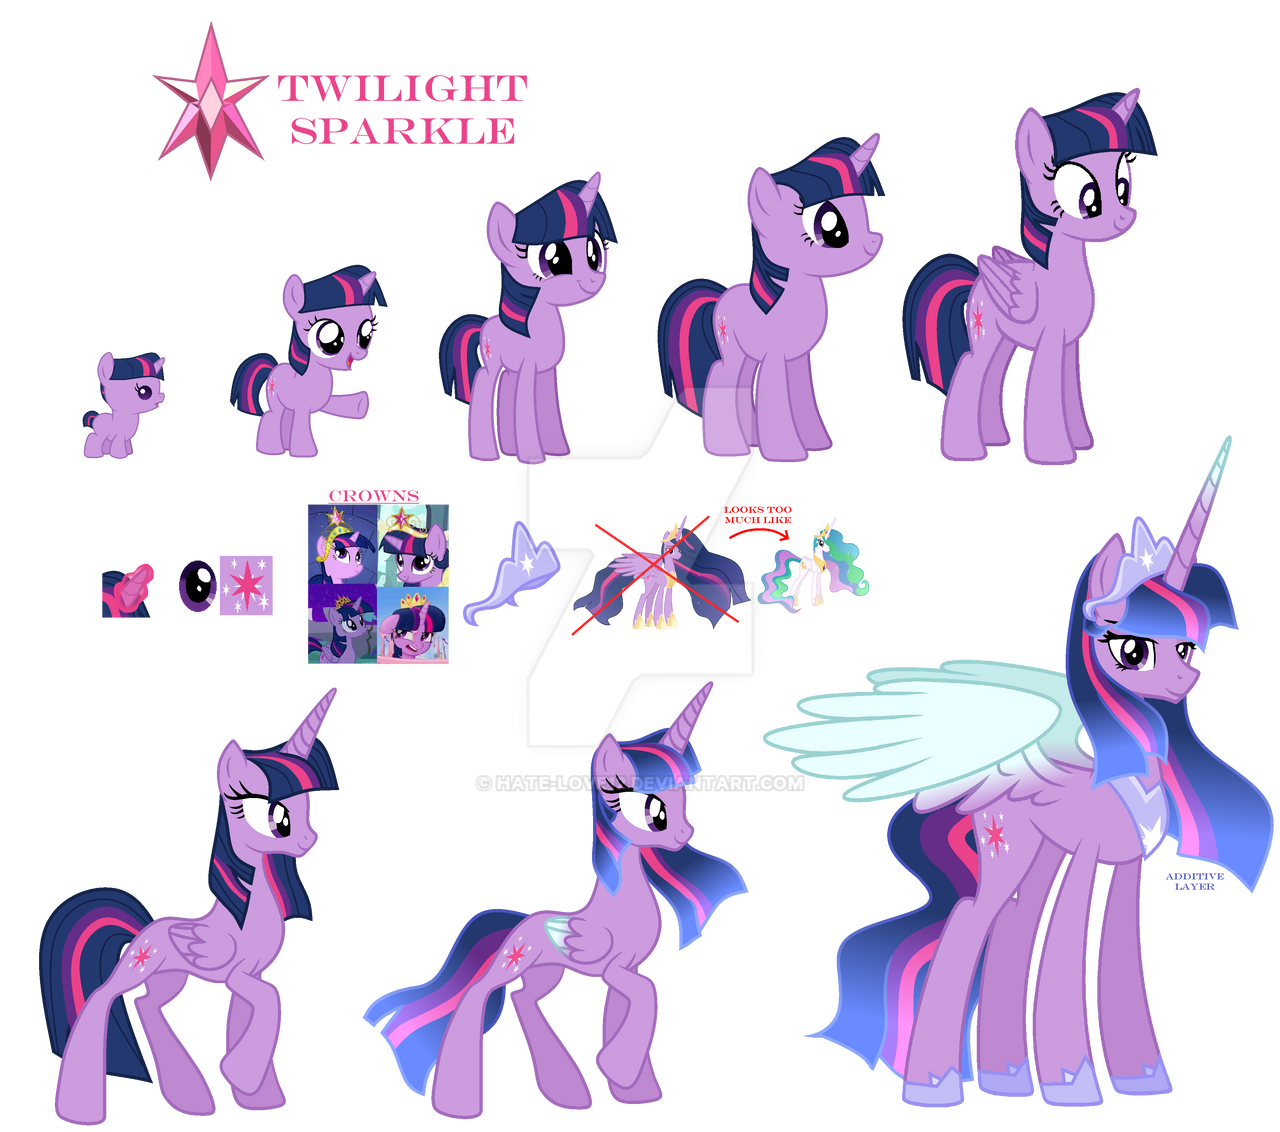 Twilight Sparkle (Ultimate Reference) by Hate-Love12 on DeviantArt